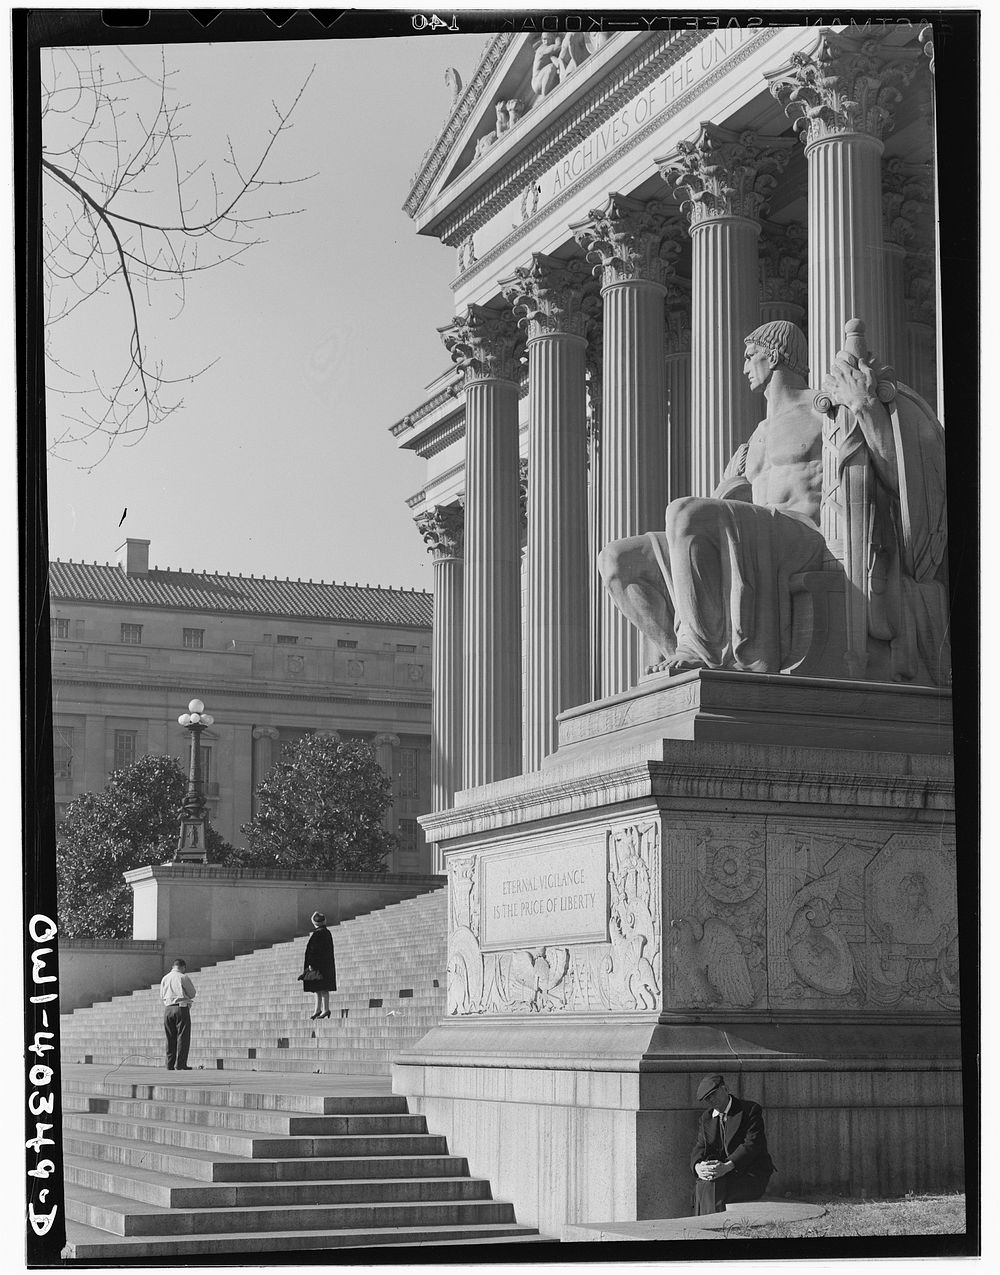 [Untitled photo, possibly related to: Washington, D.C. The National Archives building]. Sourced from the Library of Congress.